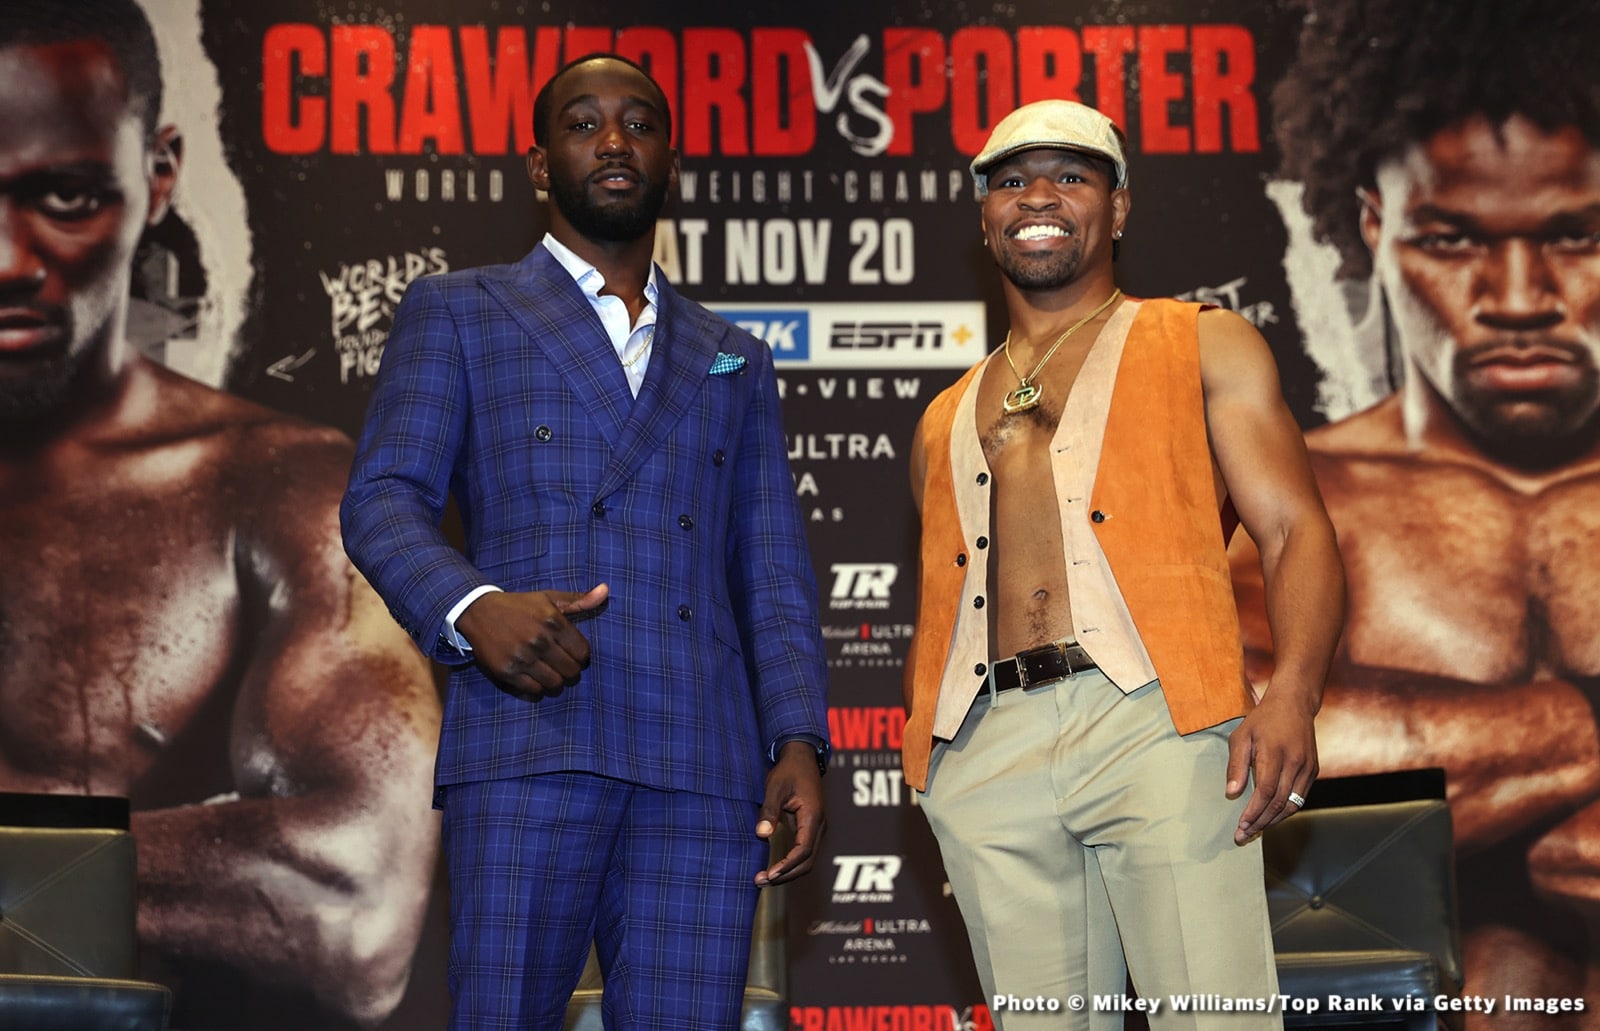 Shawn Porter, Terence Crawford boxing image / photo